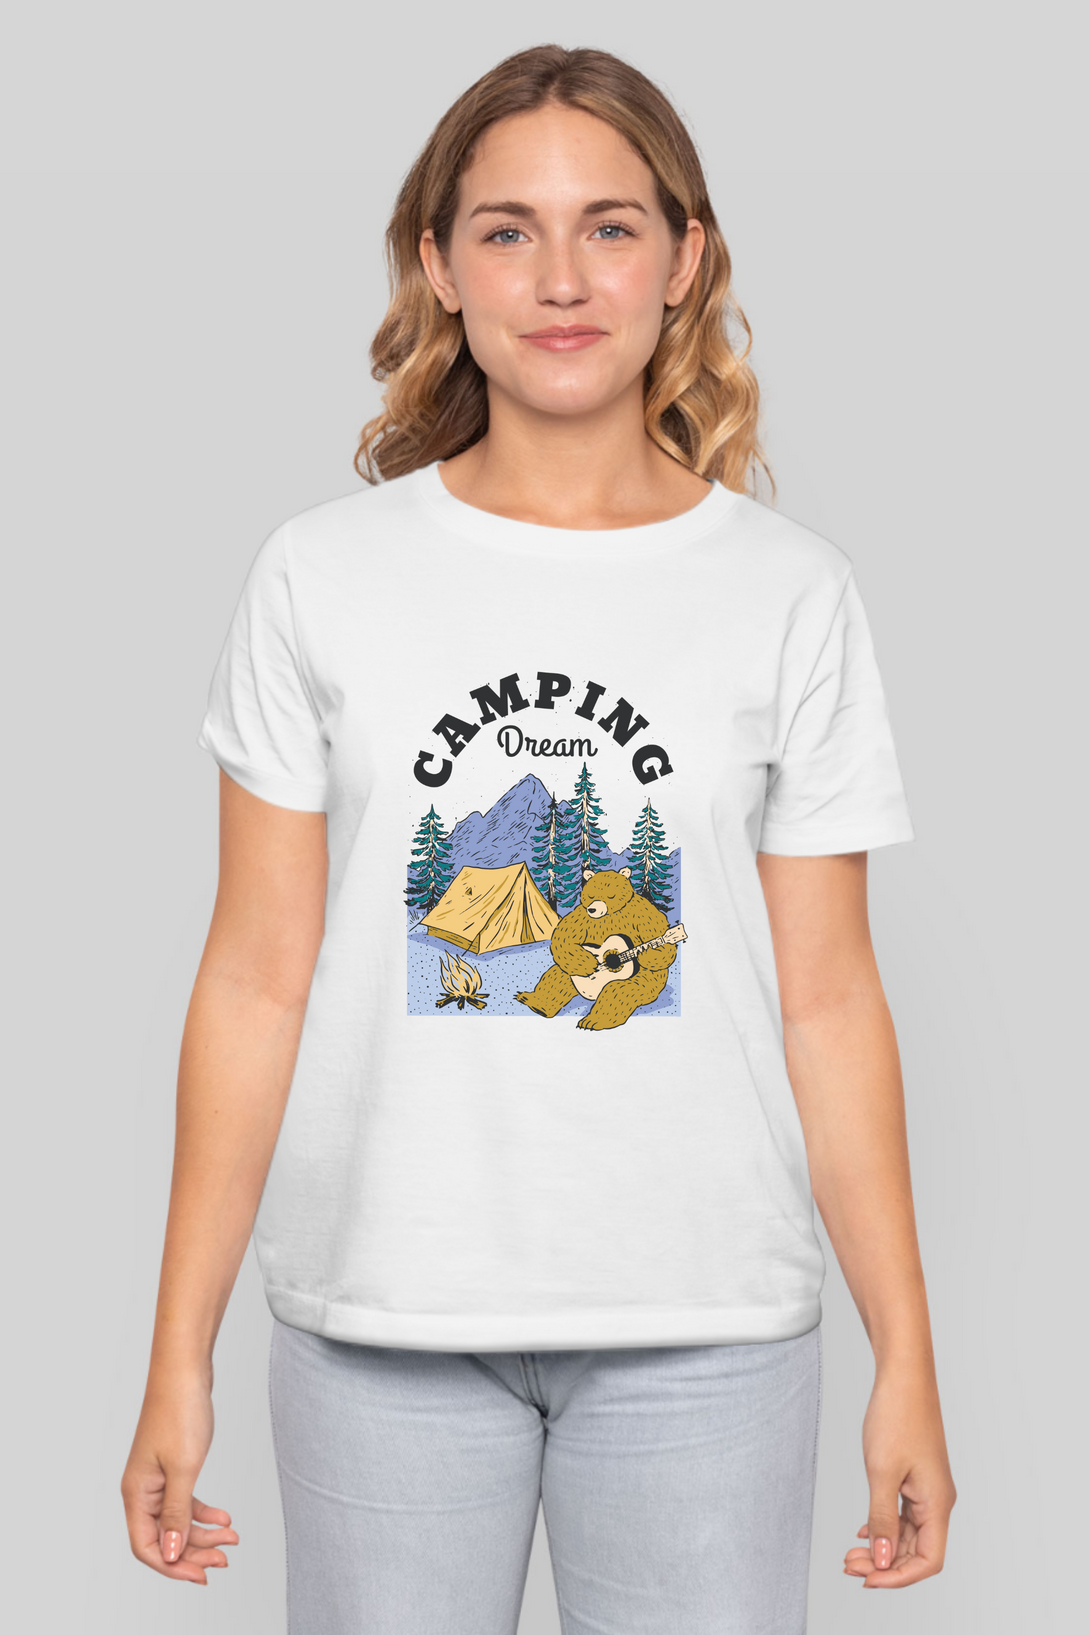 Camping Dream Printed T-Shirt For Women - WowWaves - 9